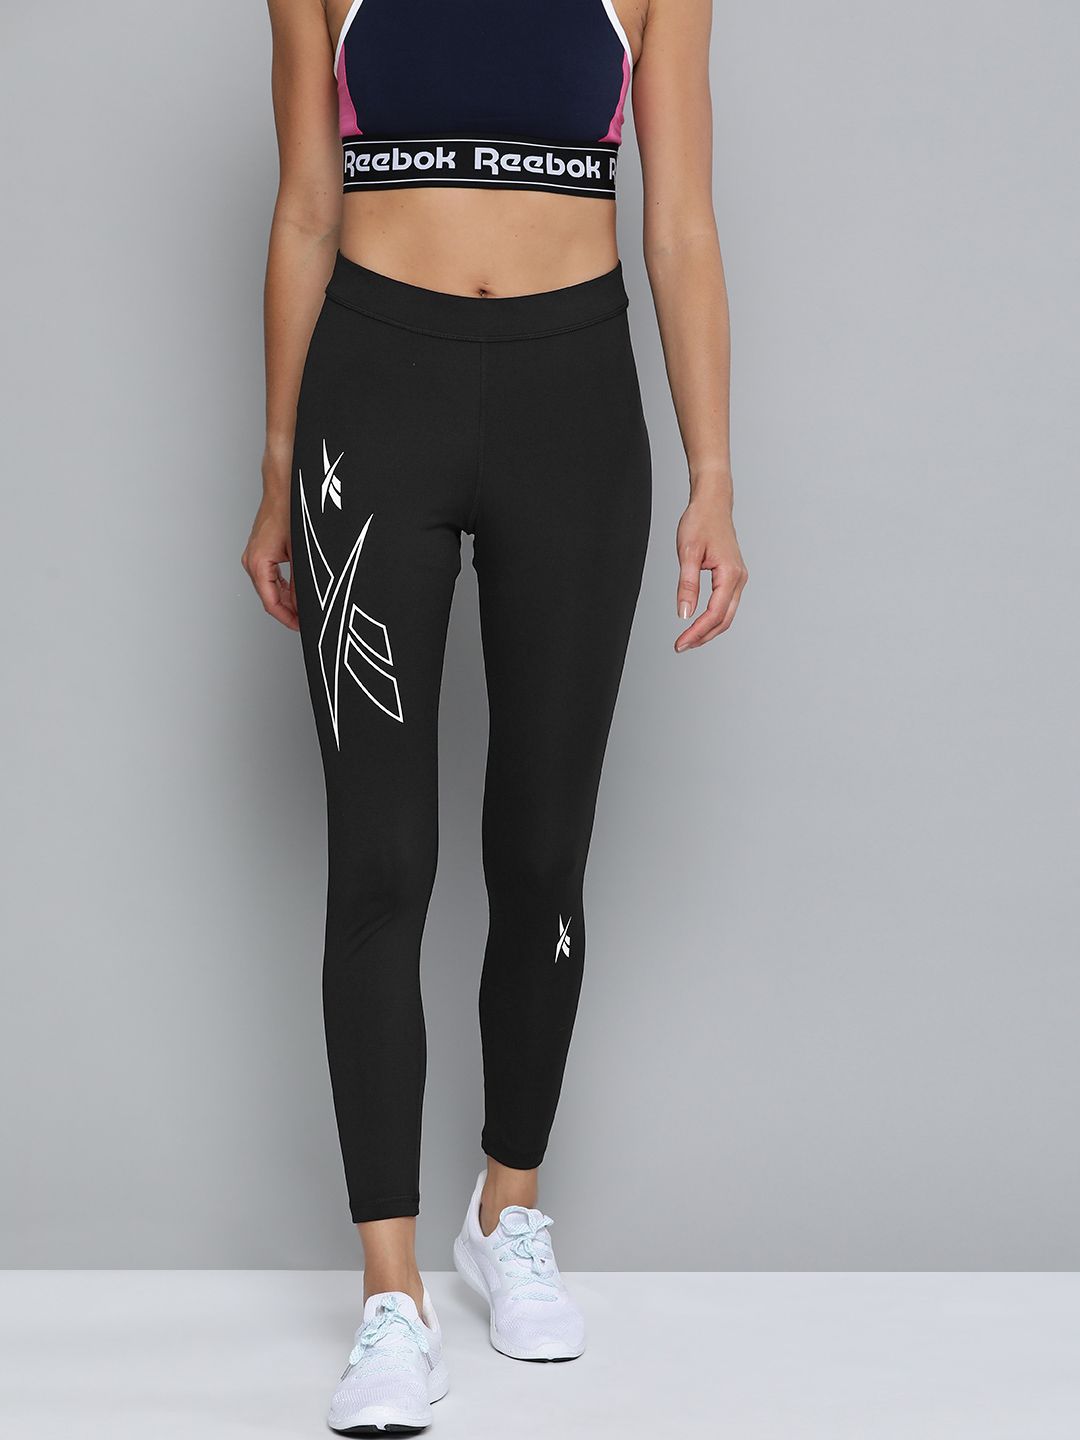 Reebok Women Black Solid High Rise Tights Price in India